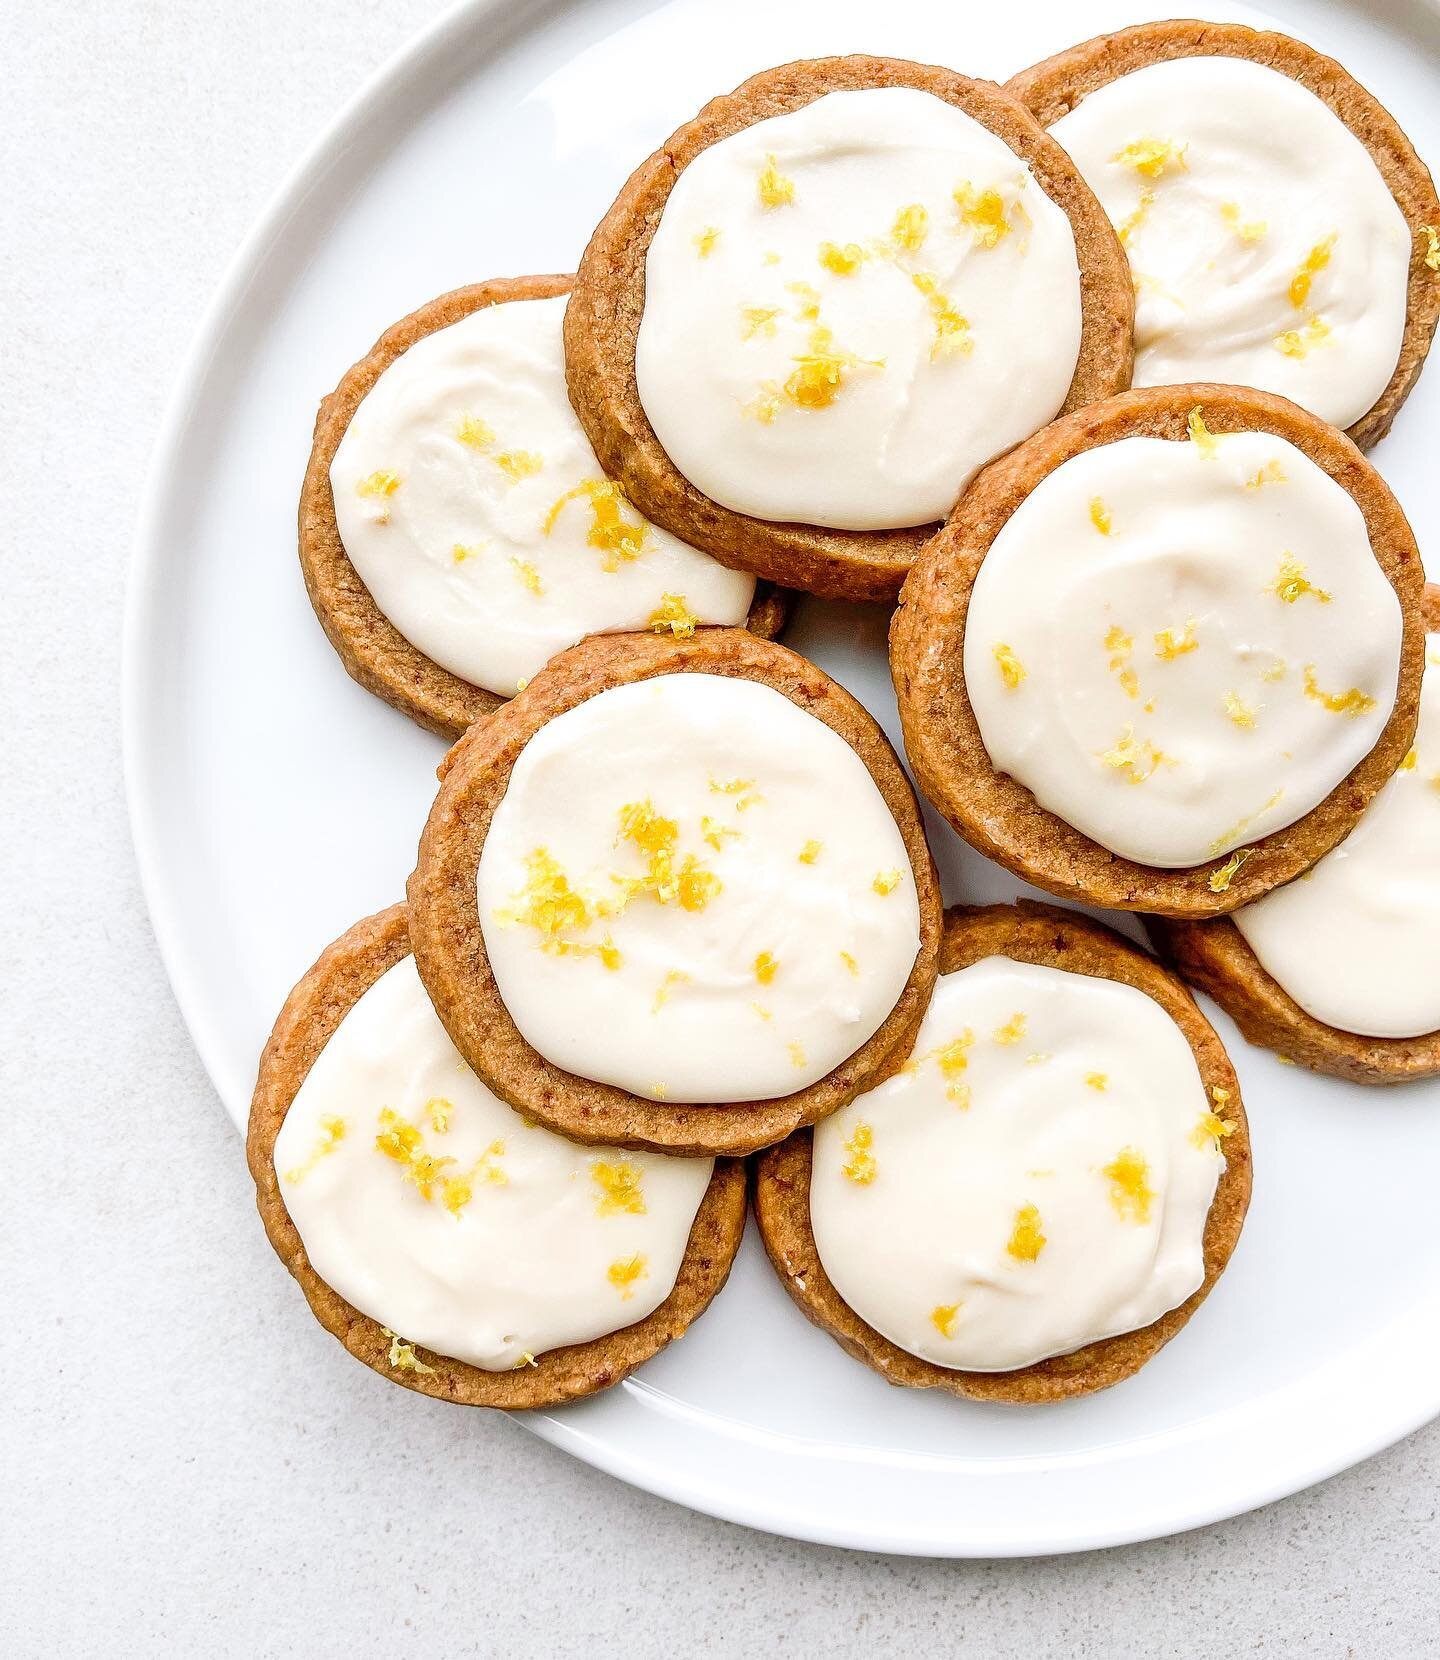 ✨Slice &amp; Bake Lemon Shortbread Cookies✨ These delicious cookies are topped with a sweet and tangy lemon frosting. They are the perfect bite to have with your morning cup of coffee, or as an after dinner treat! Grab the recipe from the link in my 